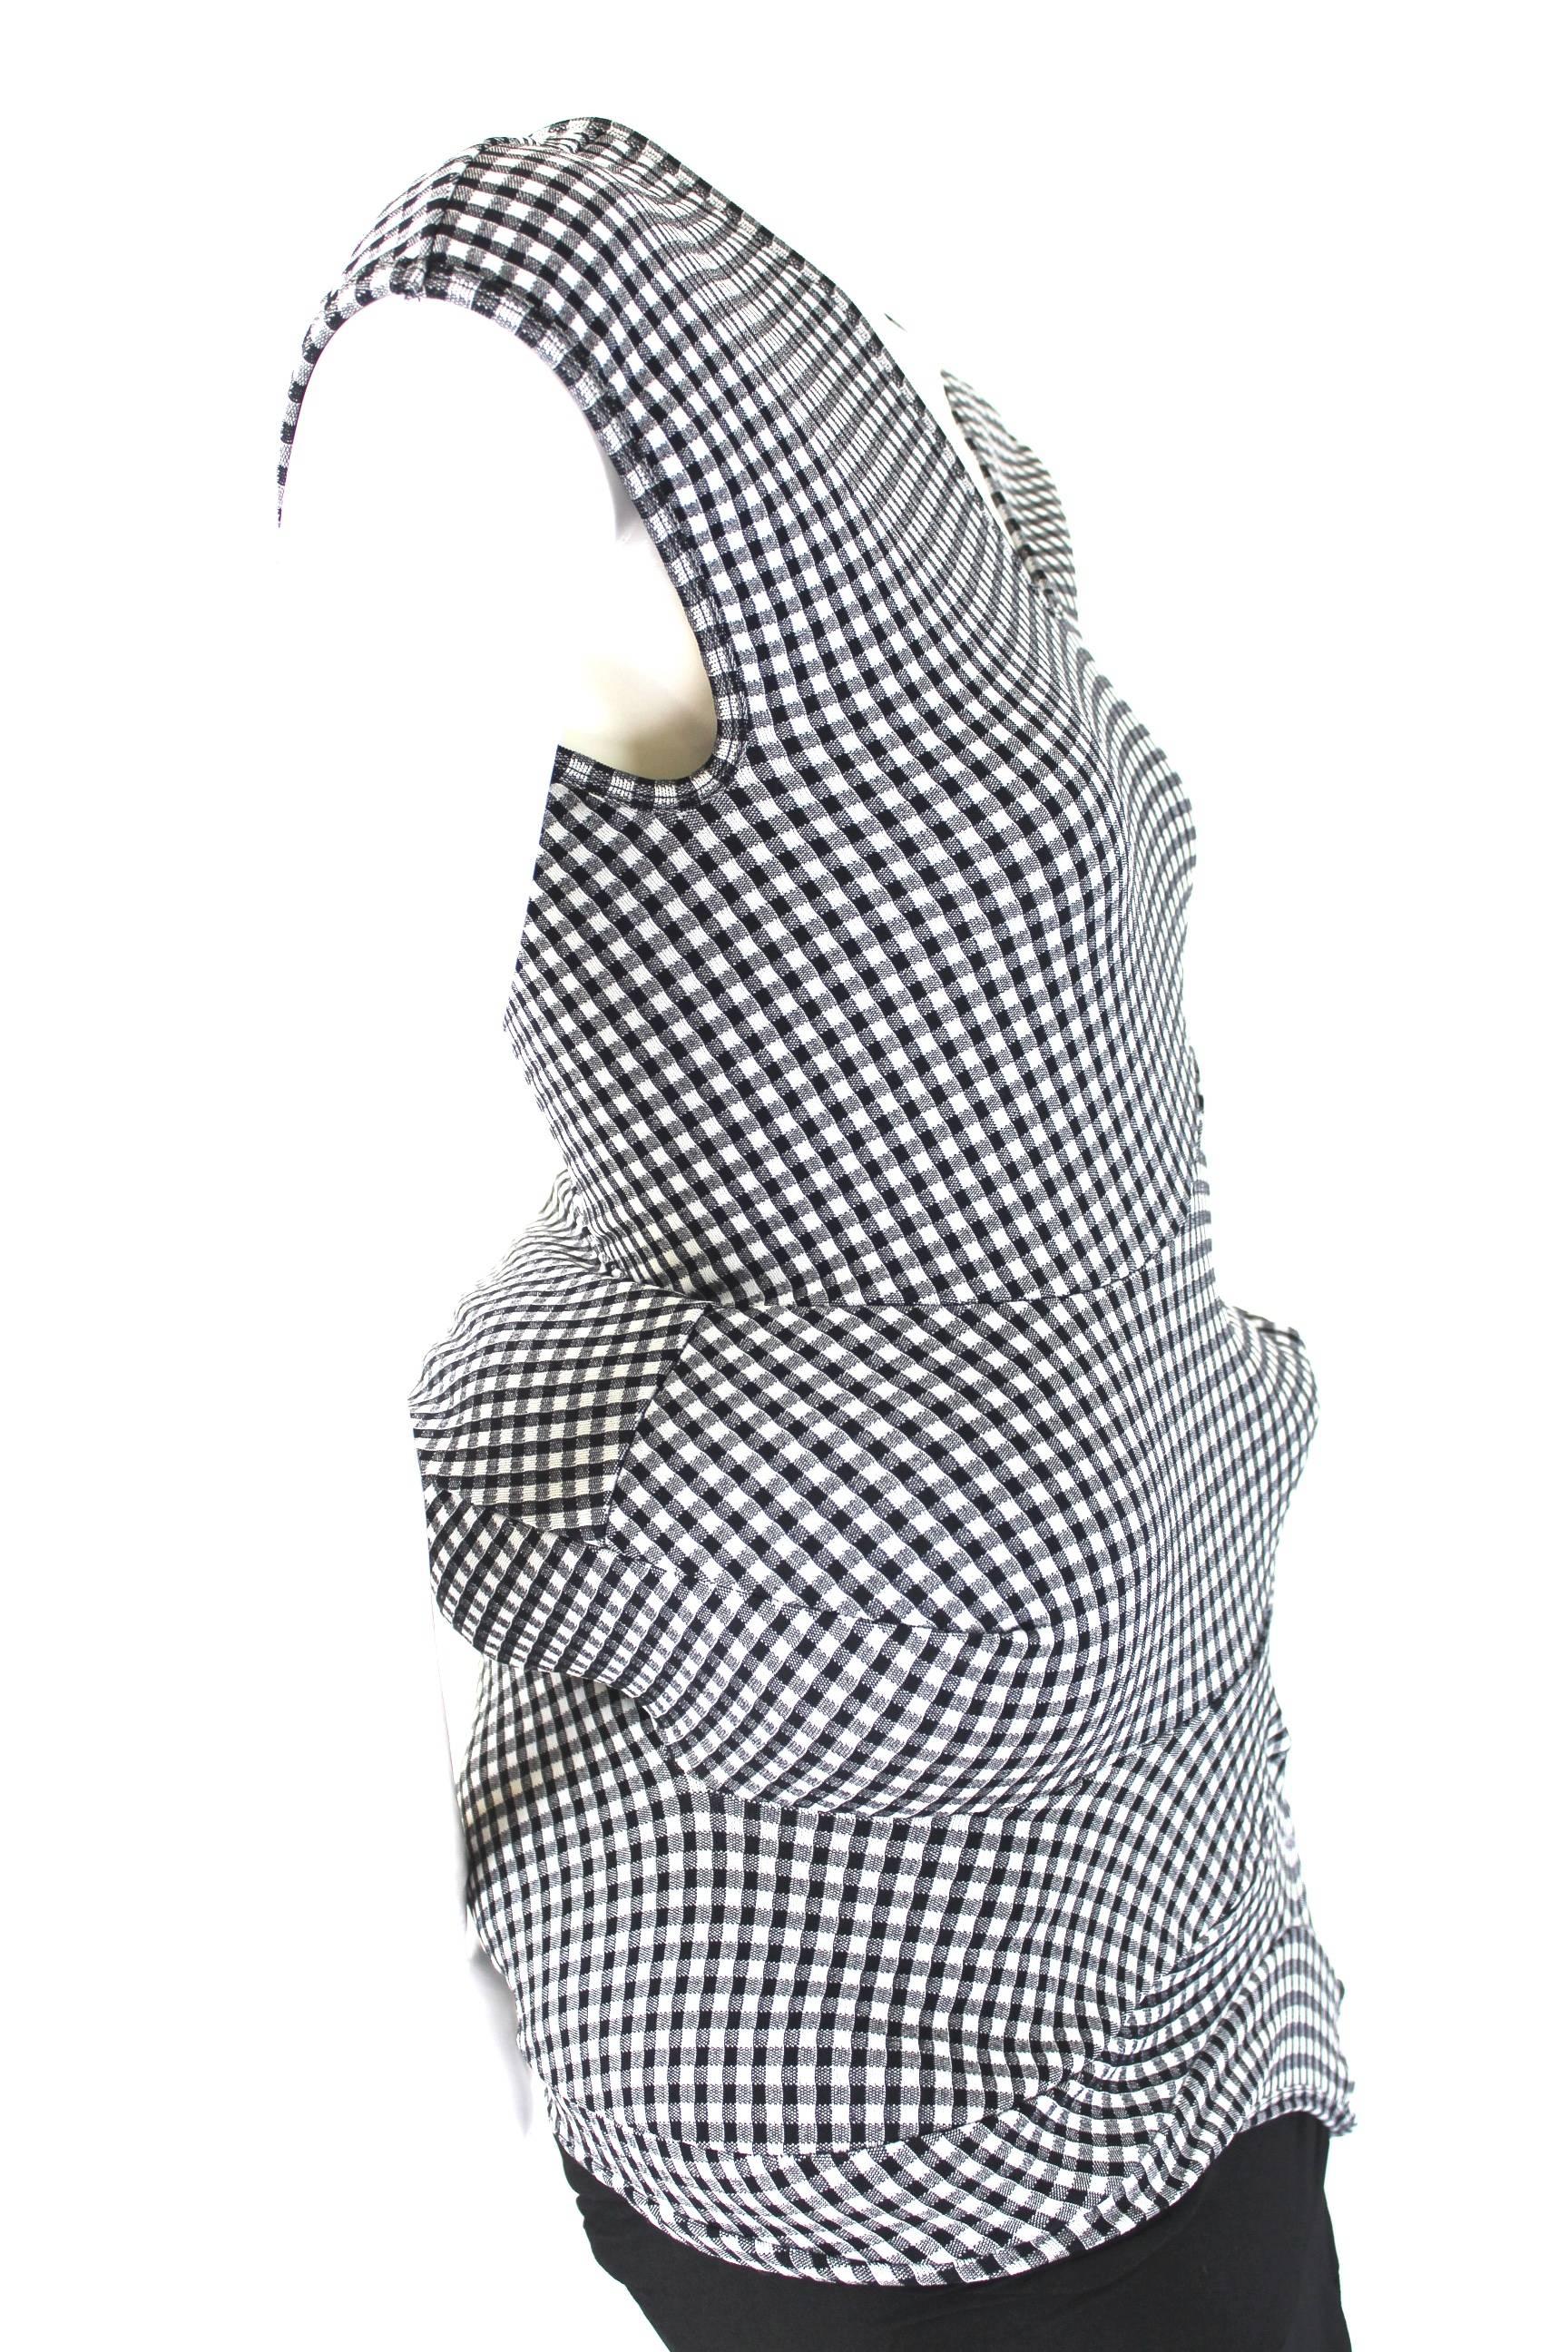 Comme des Garcons AD 1996 'Body Meets Dress' Gingham Top In Excellent Condition In Bath, GB